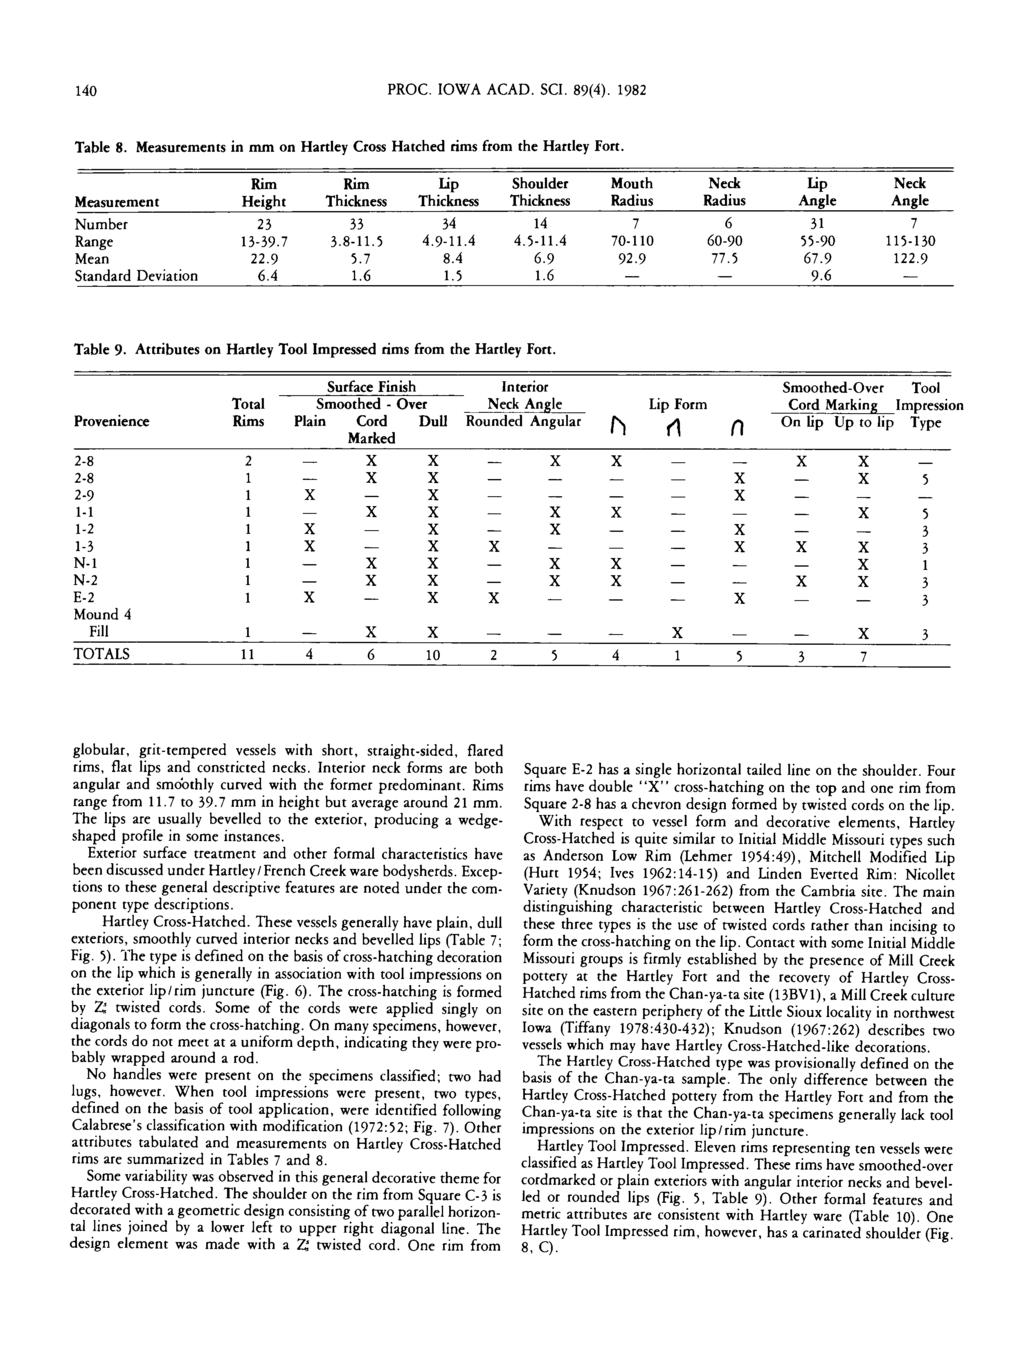 Proceedings of the Iowa Academy of Science, Vol. 89 [1982], No. 4, Art. 3 140 PROC. IOWA ACAD. SCI. 89(4). 1982 Table 8. Measurements in mm on Hartley Cross Hatched rims from the Hartley Fort.